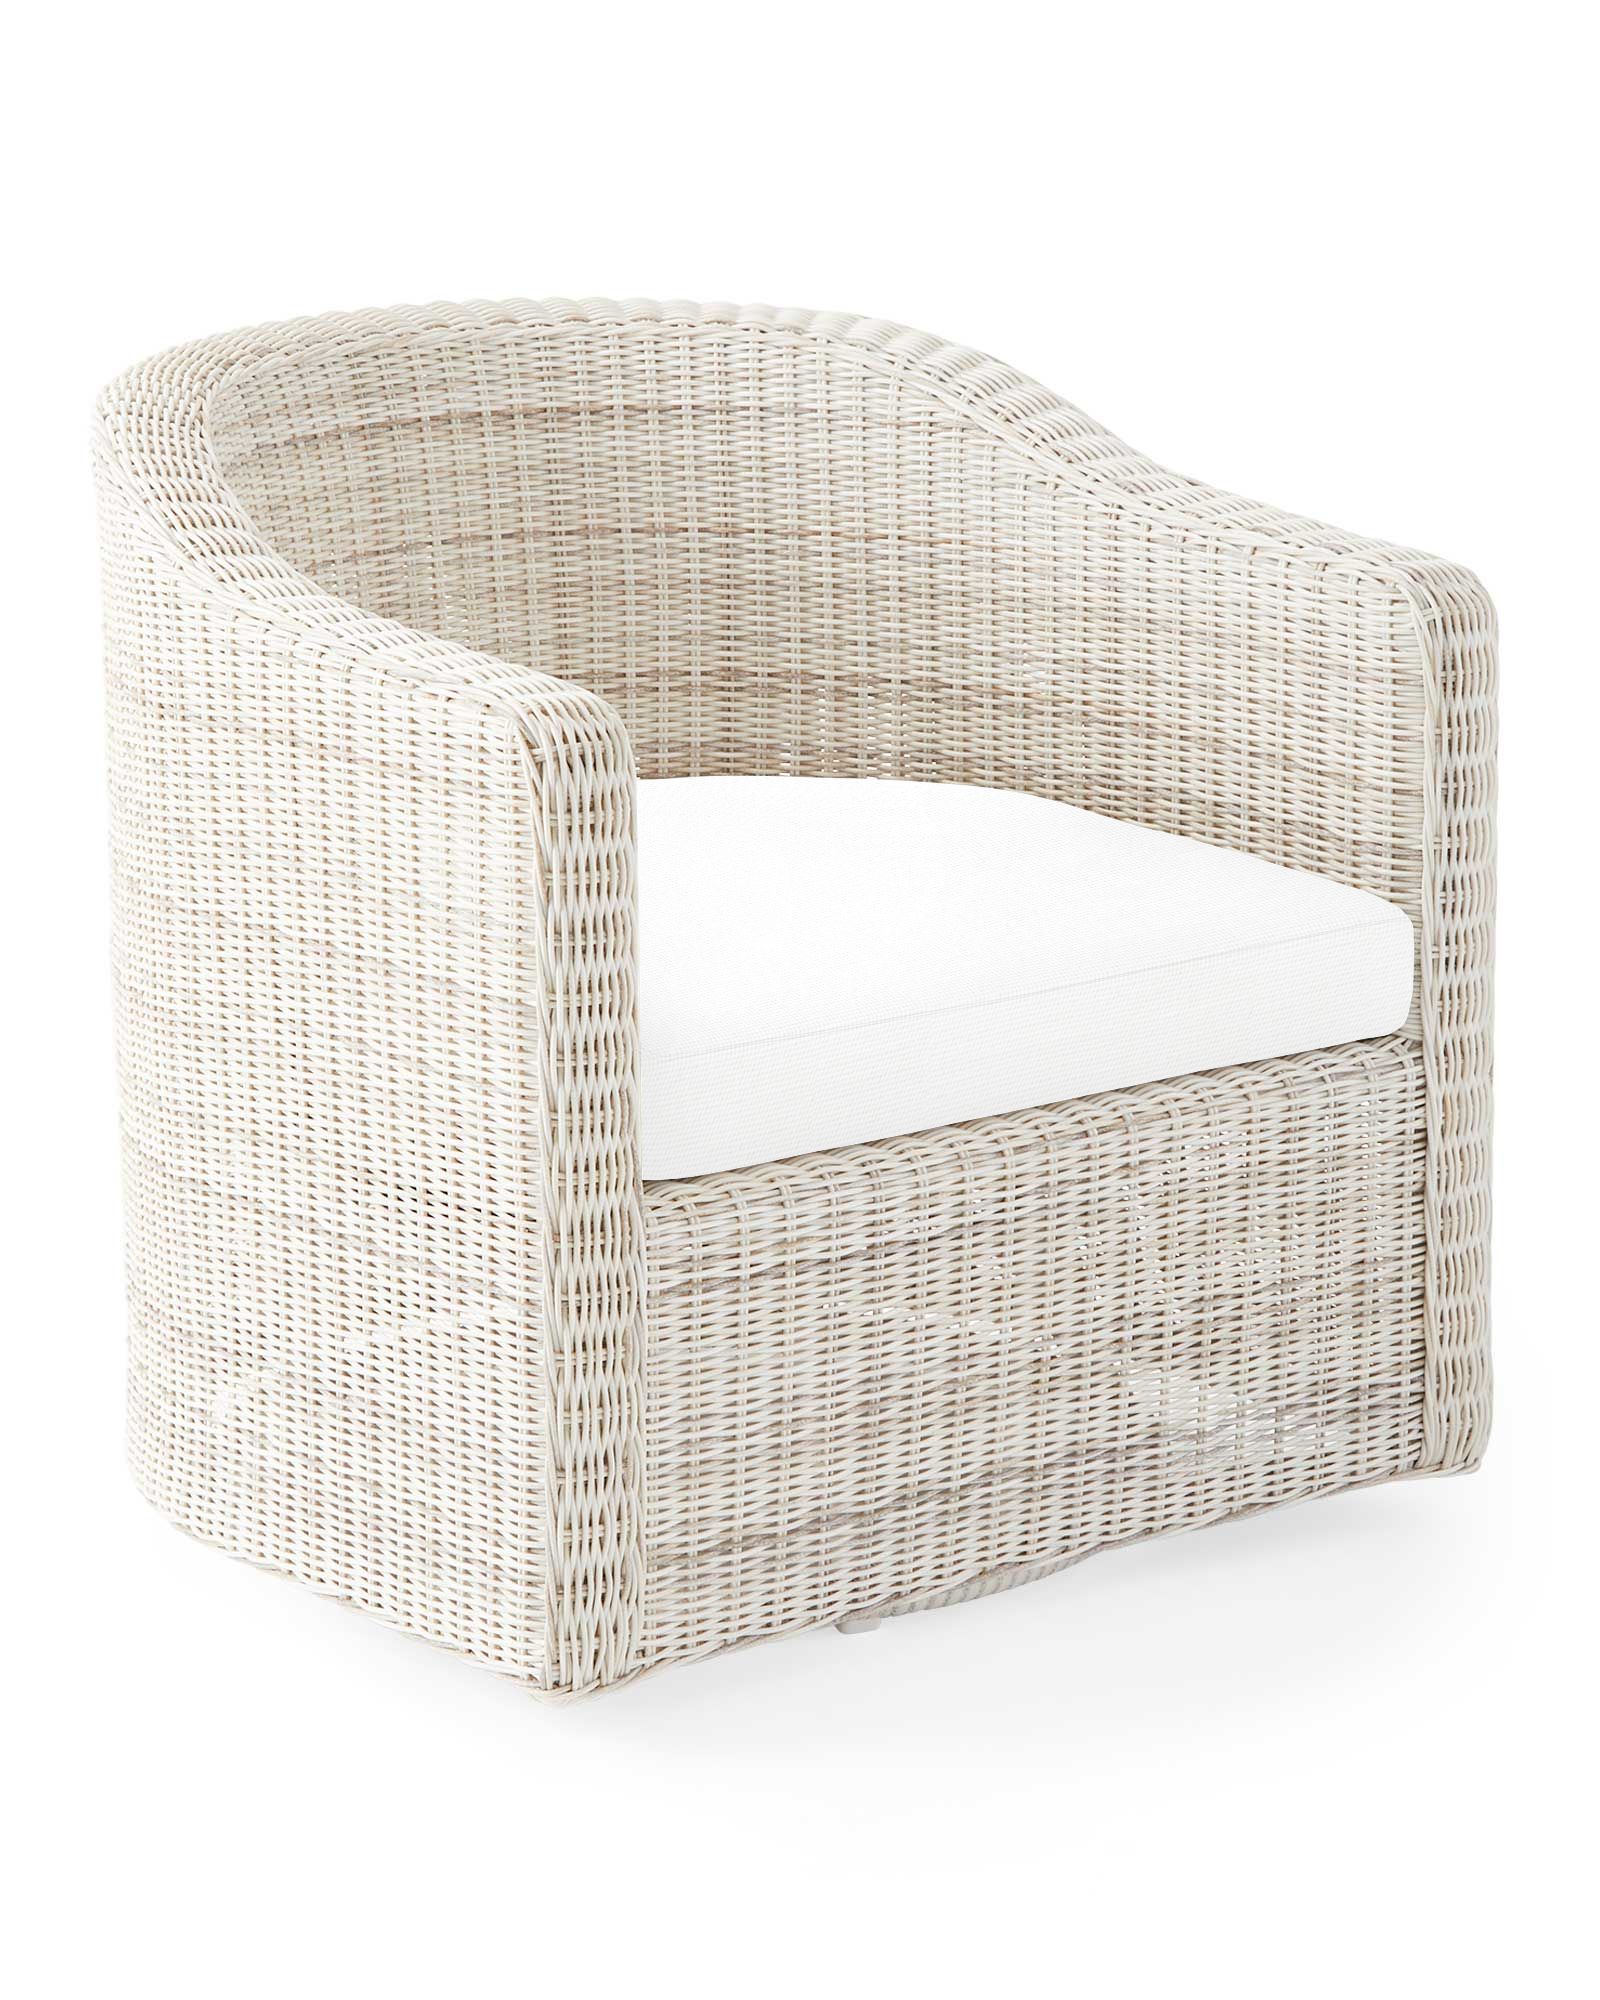 Tofino Swivel Chair - Driftwood | Serena and Lily